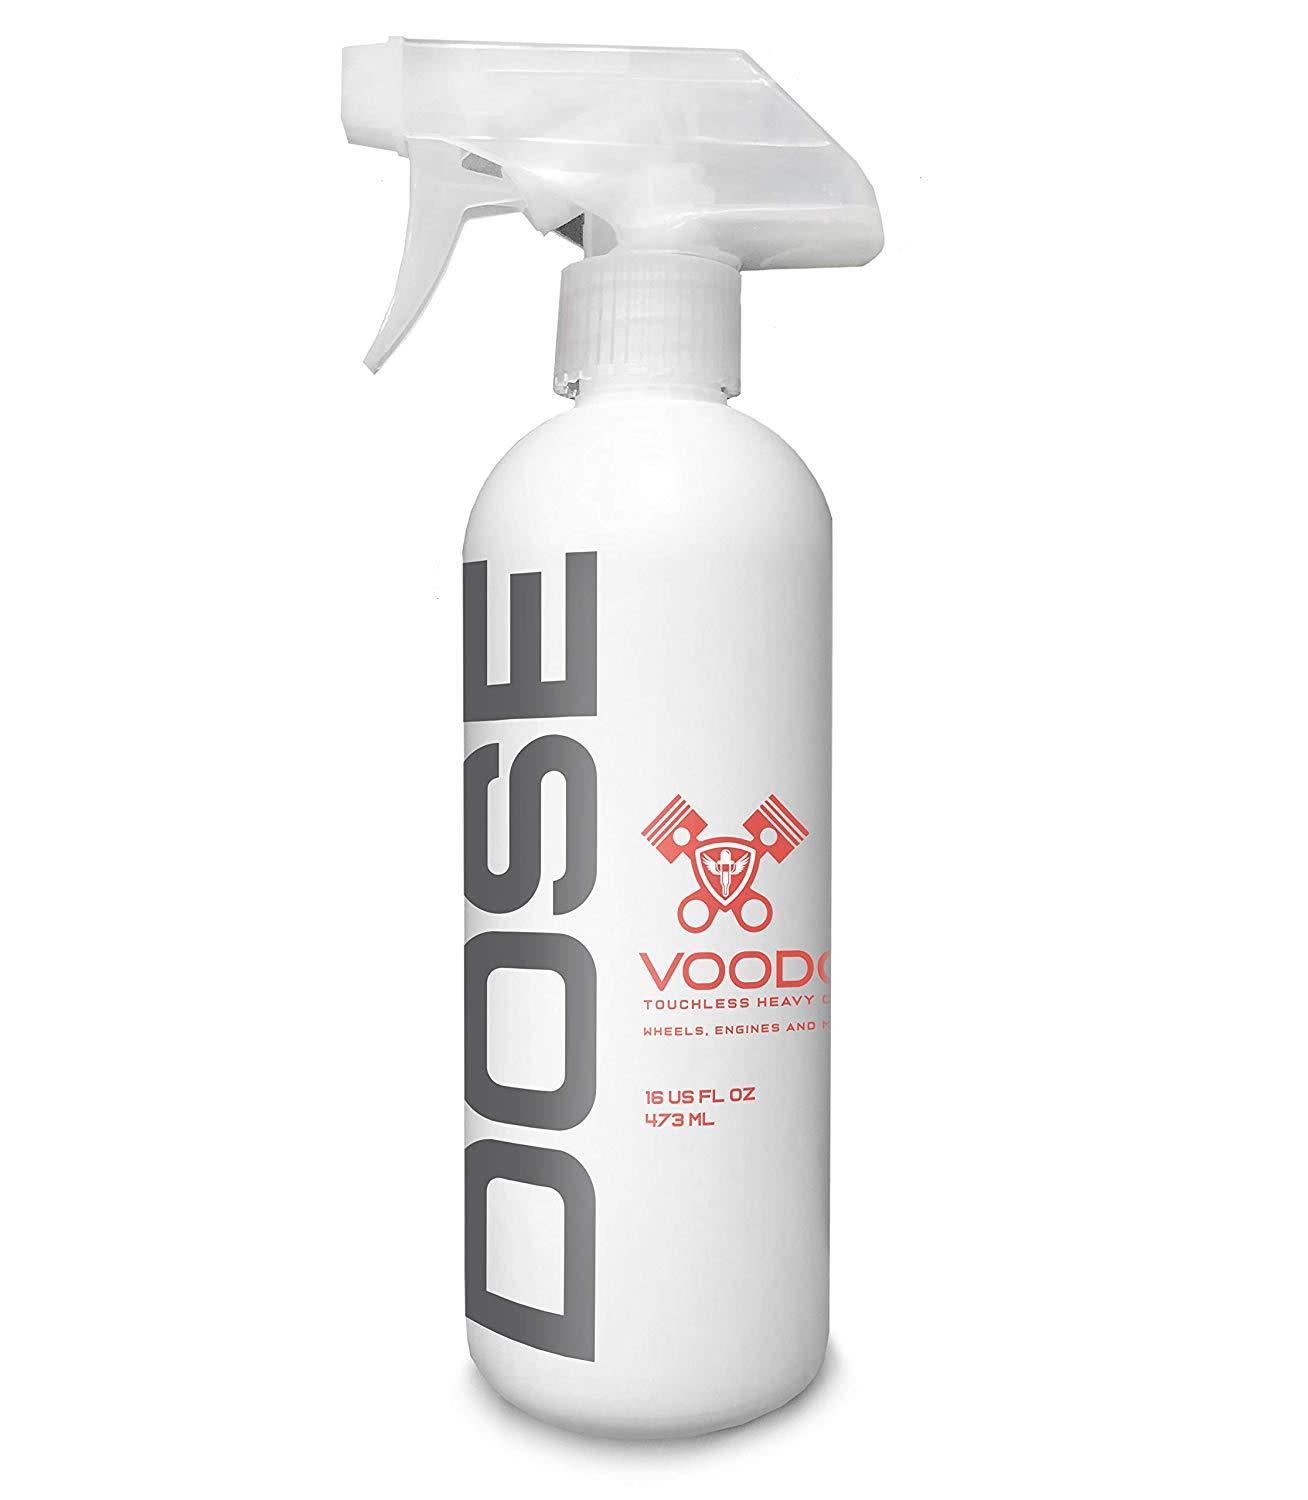 DOSE Voodoo Touchless Heavy Cleaner for Wheels, Engines and More 16 Ounce Bottle (MCF) - The VViViD Vinyl Wrap Shop